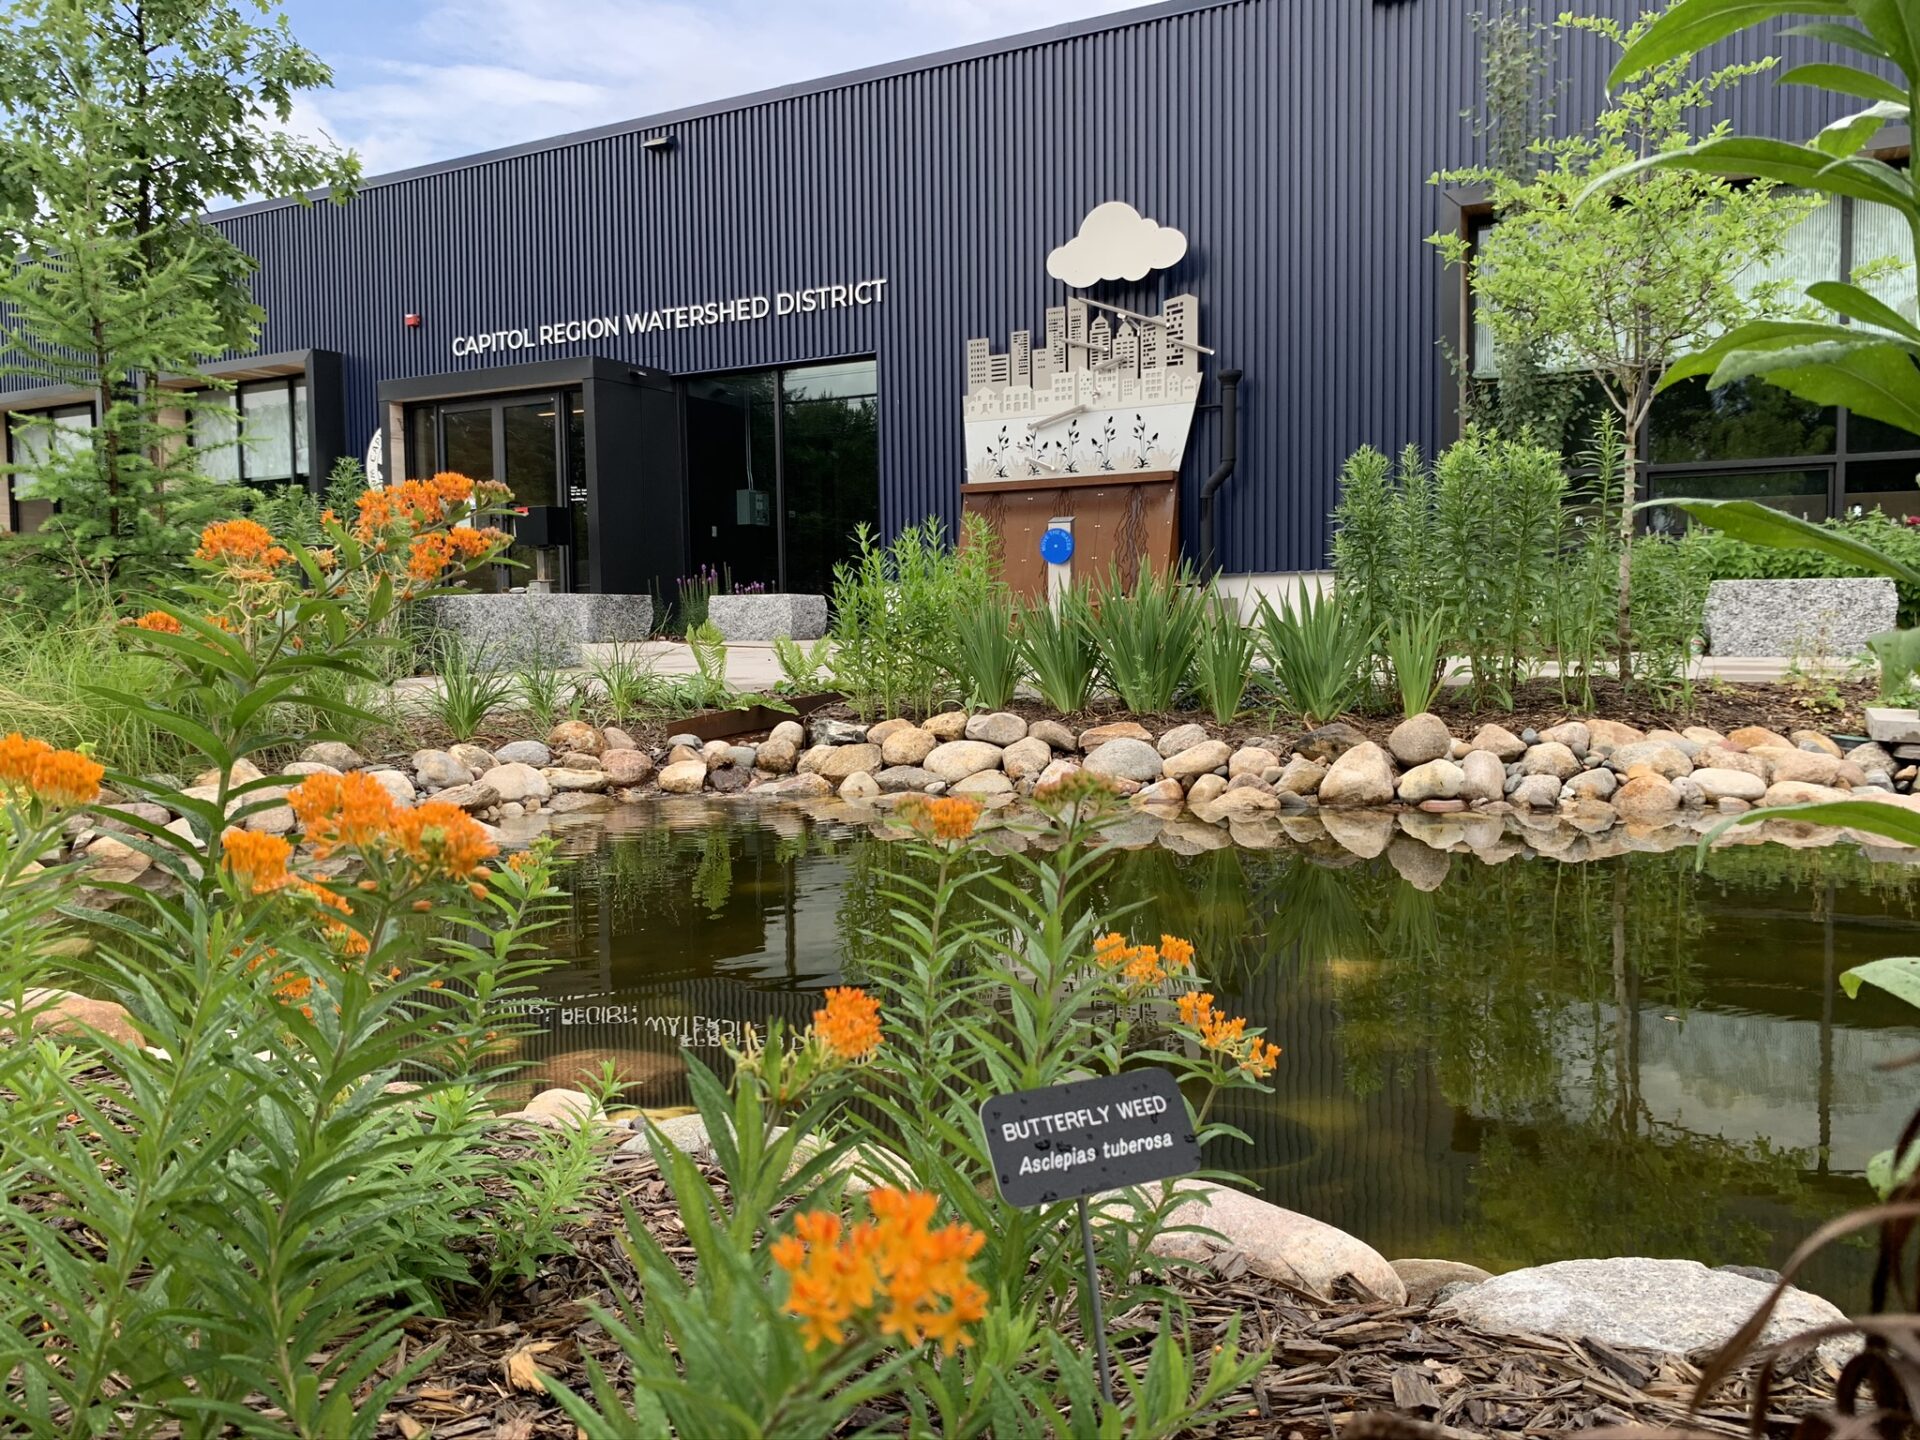 The small, rock-lined pond surrounded by blooming native plants in front of Capitol Region Watershed District's office building.